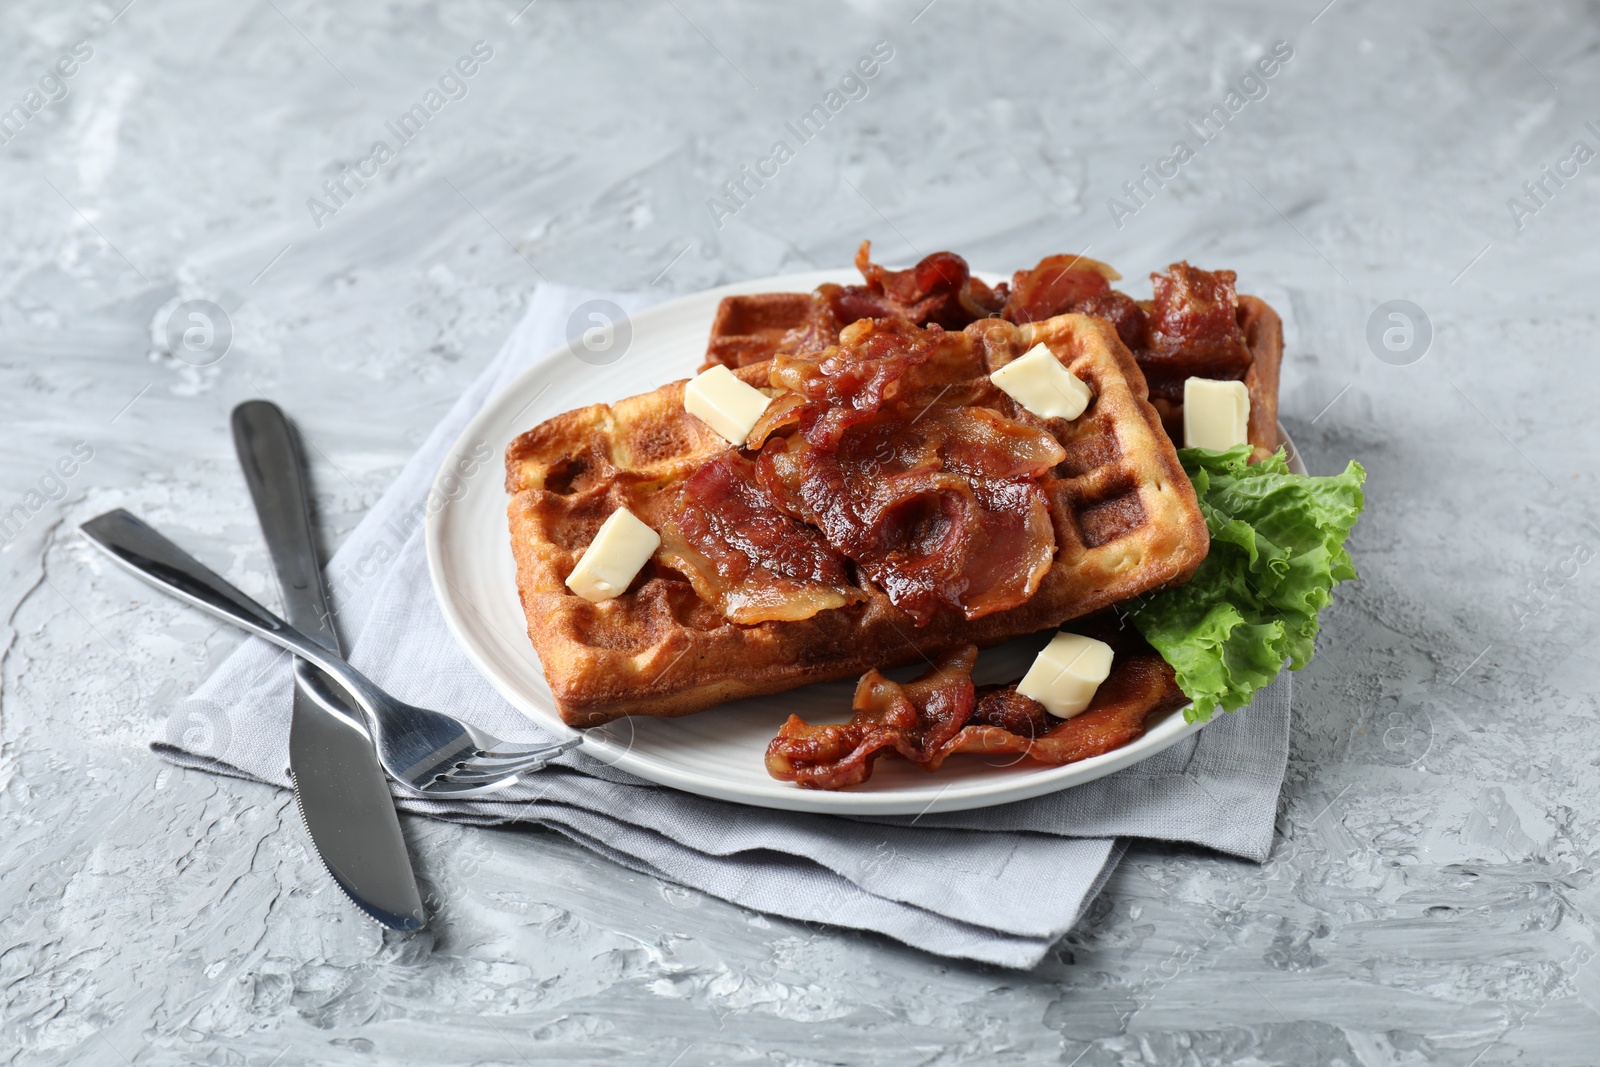 Photo of Delicious Belgium waffles served with fried bacon and butter on grey table